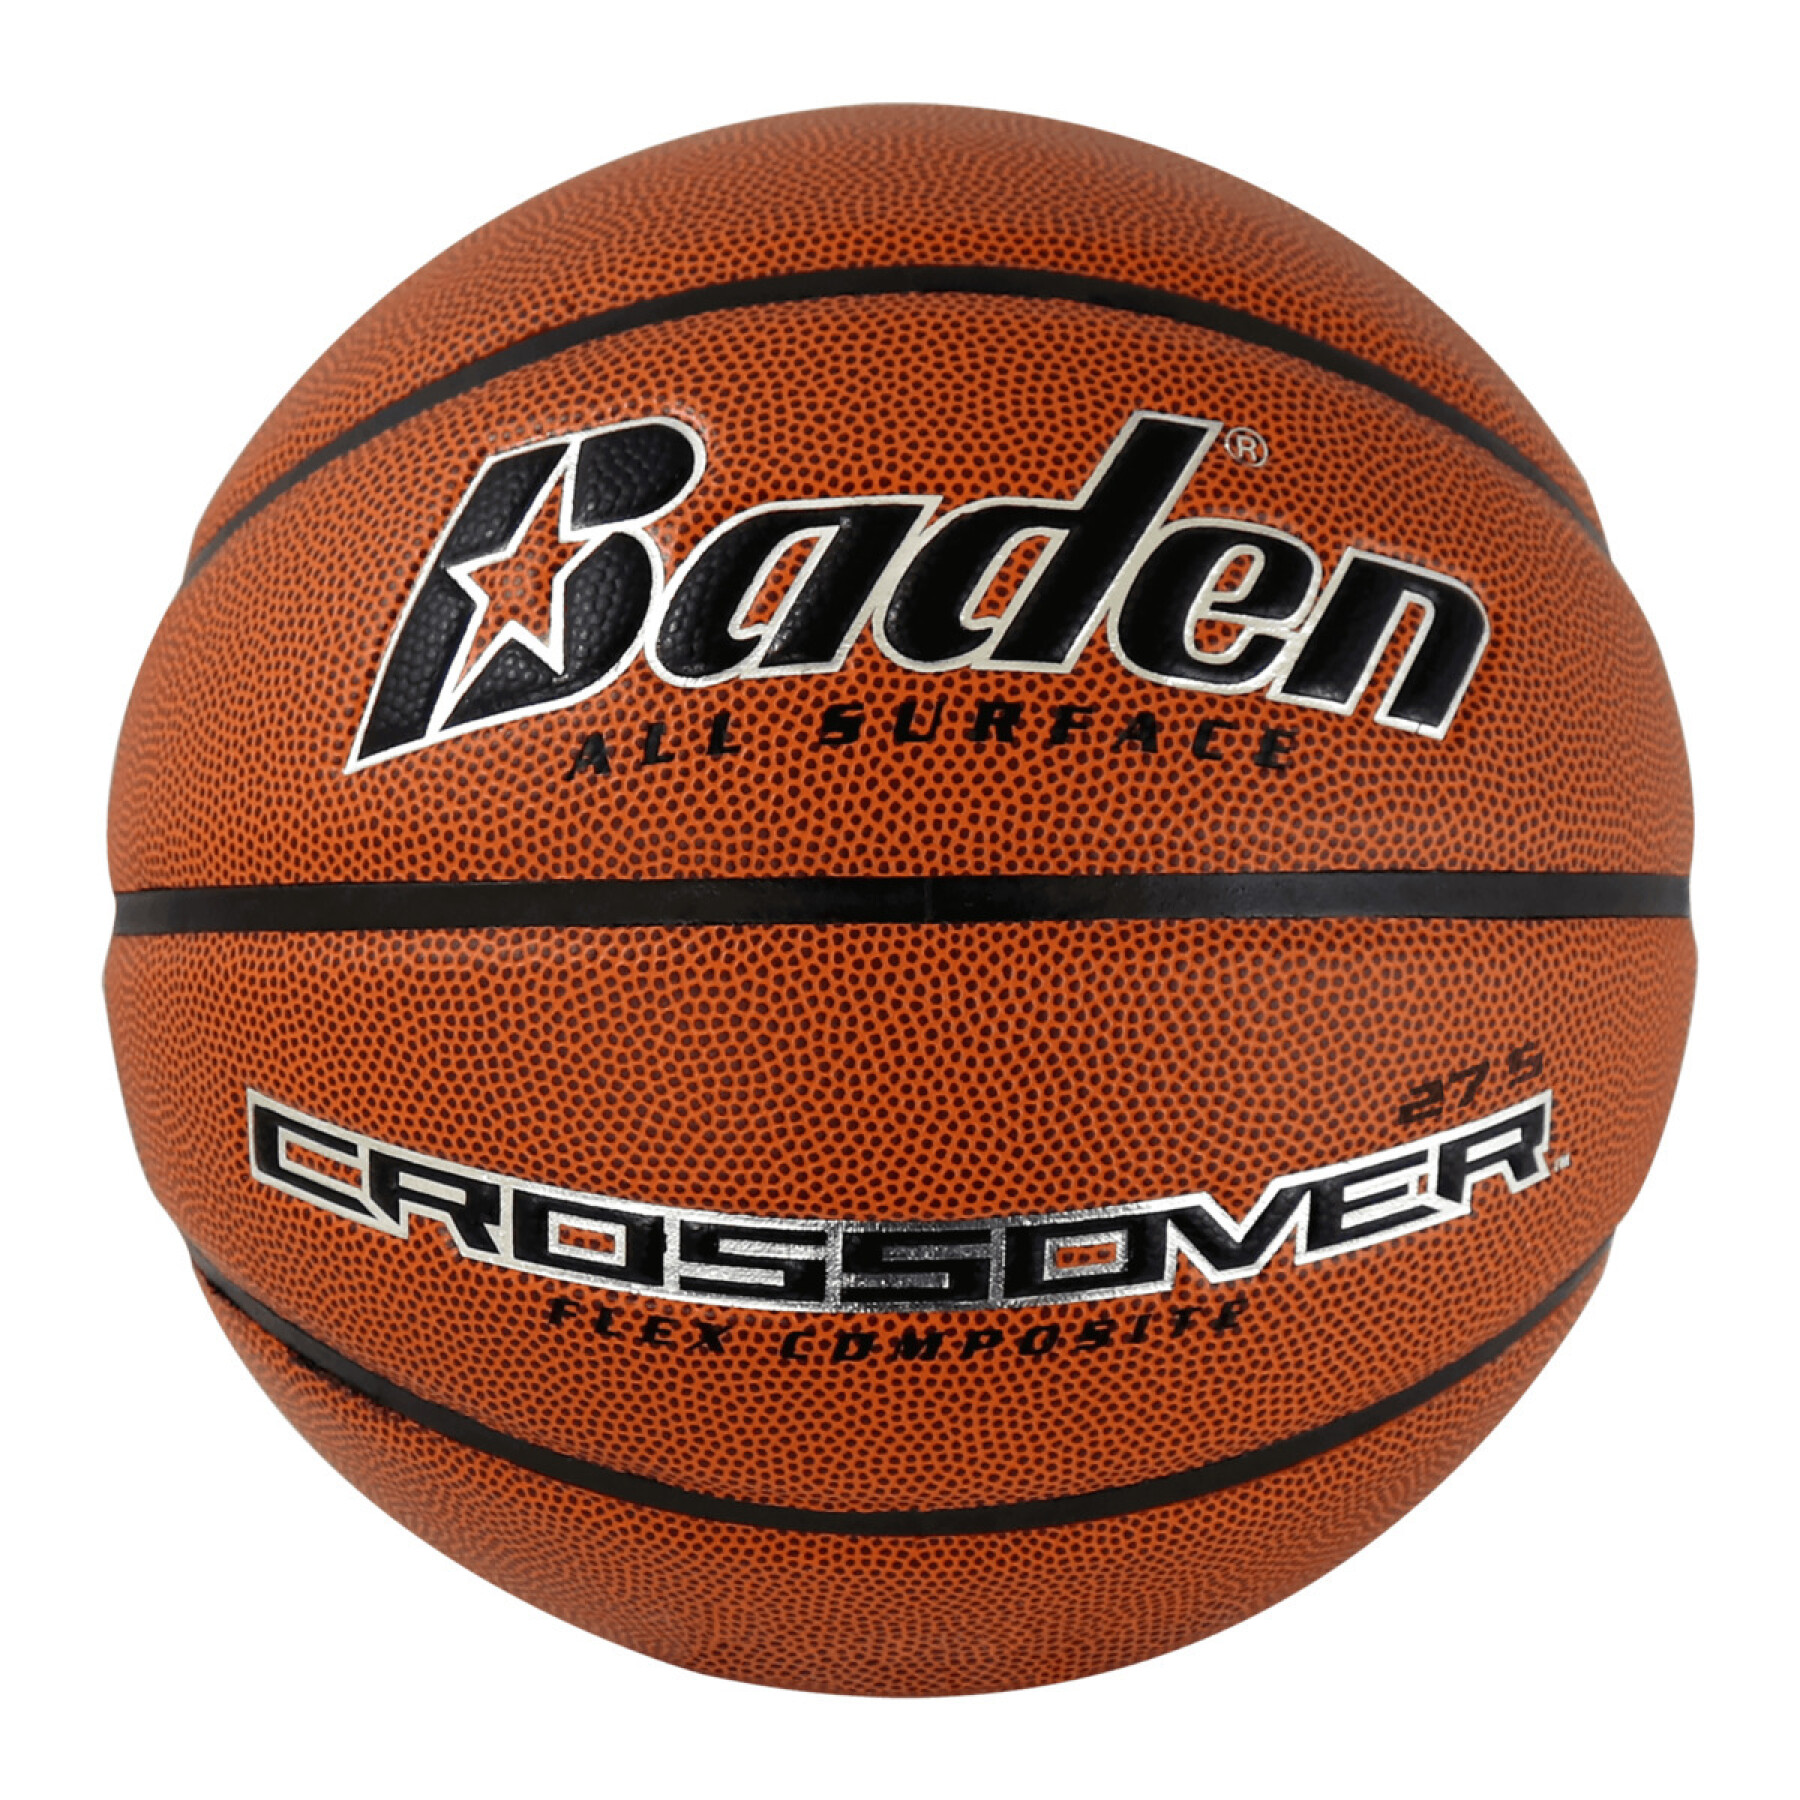 Pallone Baden Sports Crossover